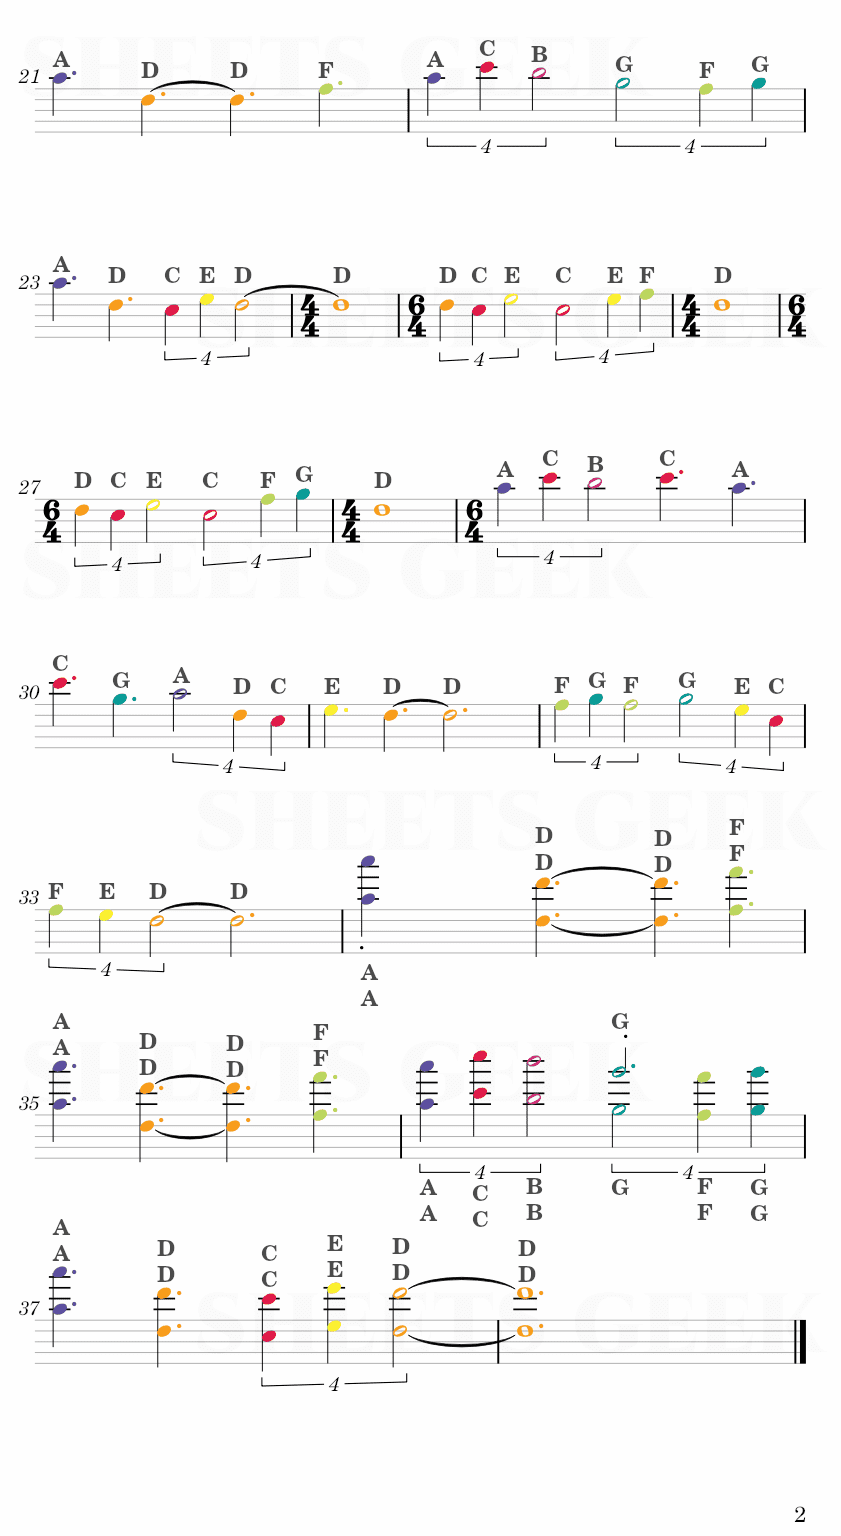 Song of Time The Temple Of Time - The Legend of Zelda: Ocarina of Time Easy Sheet Music Free for piano, keyboard, flute, violin, sax, cello page 2